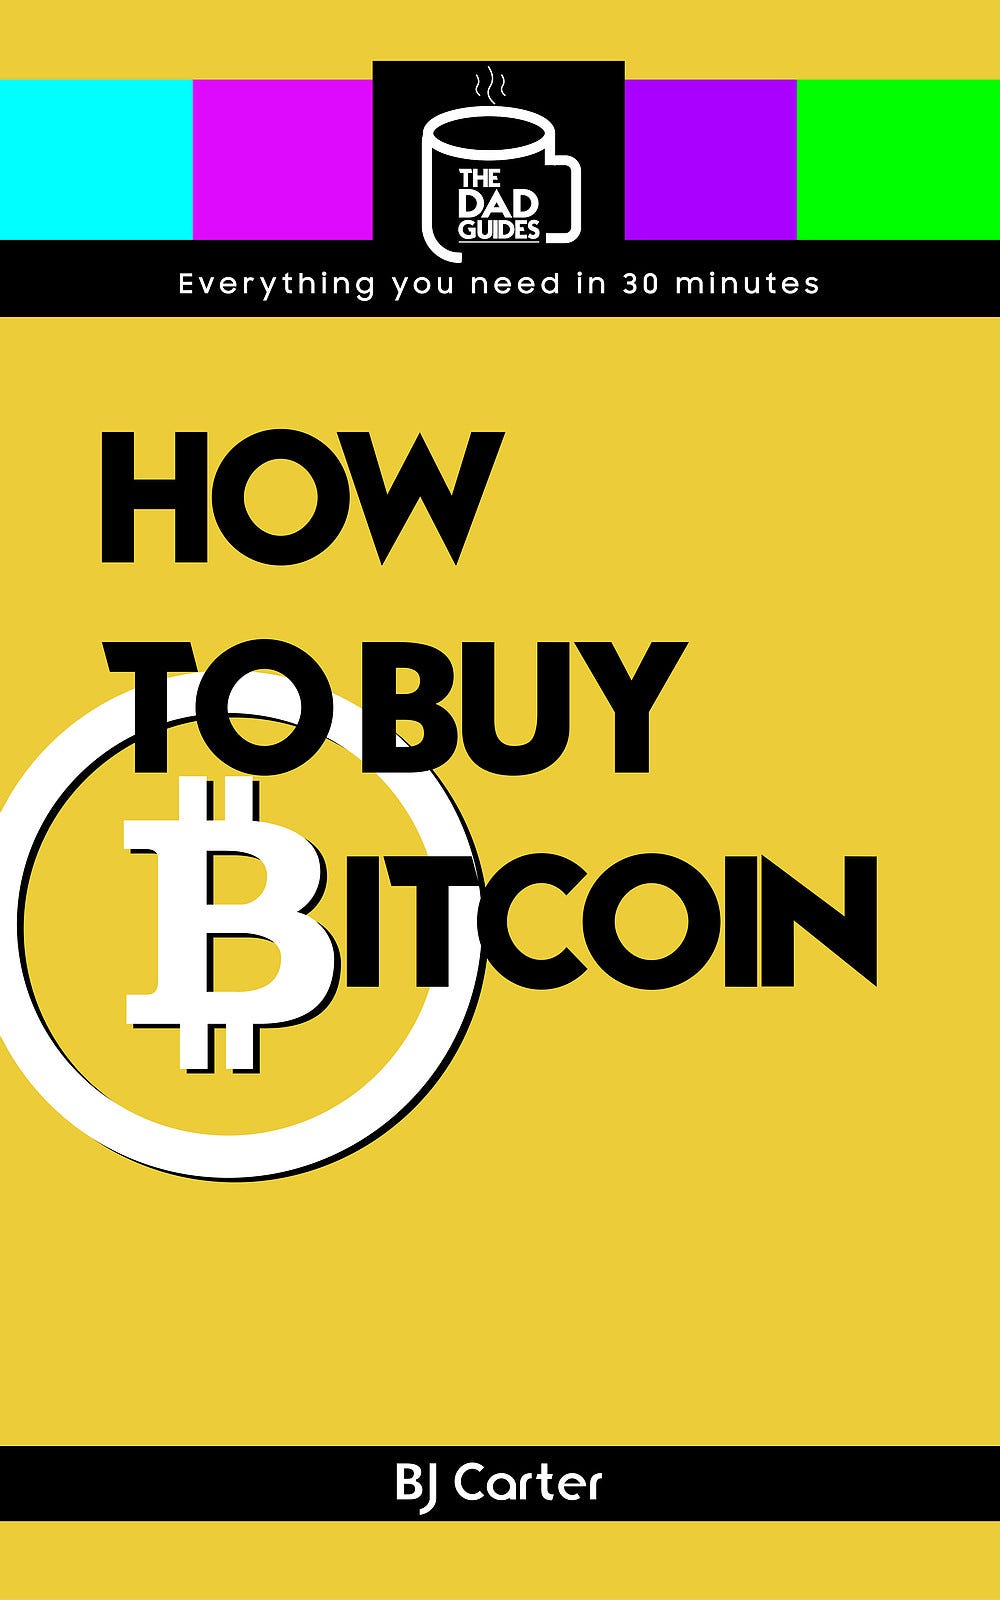 book cover of The Dad Guides: How to Buy Bitcoin